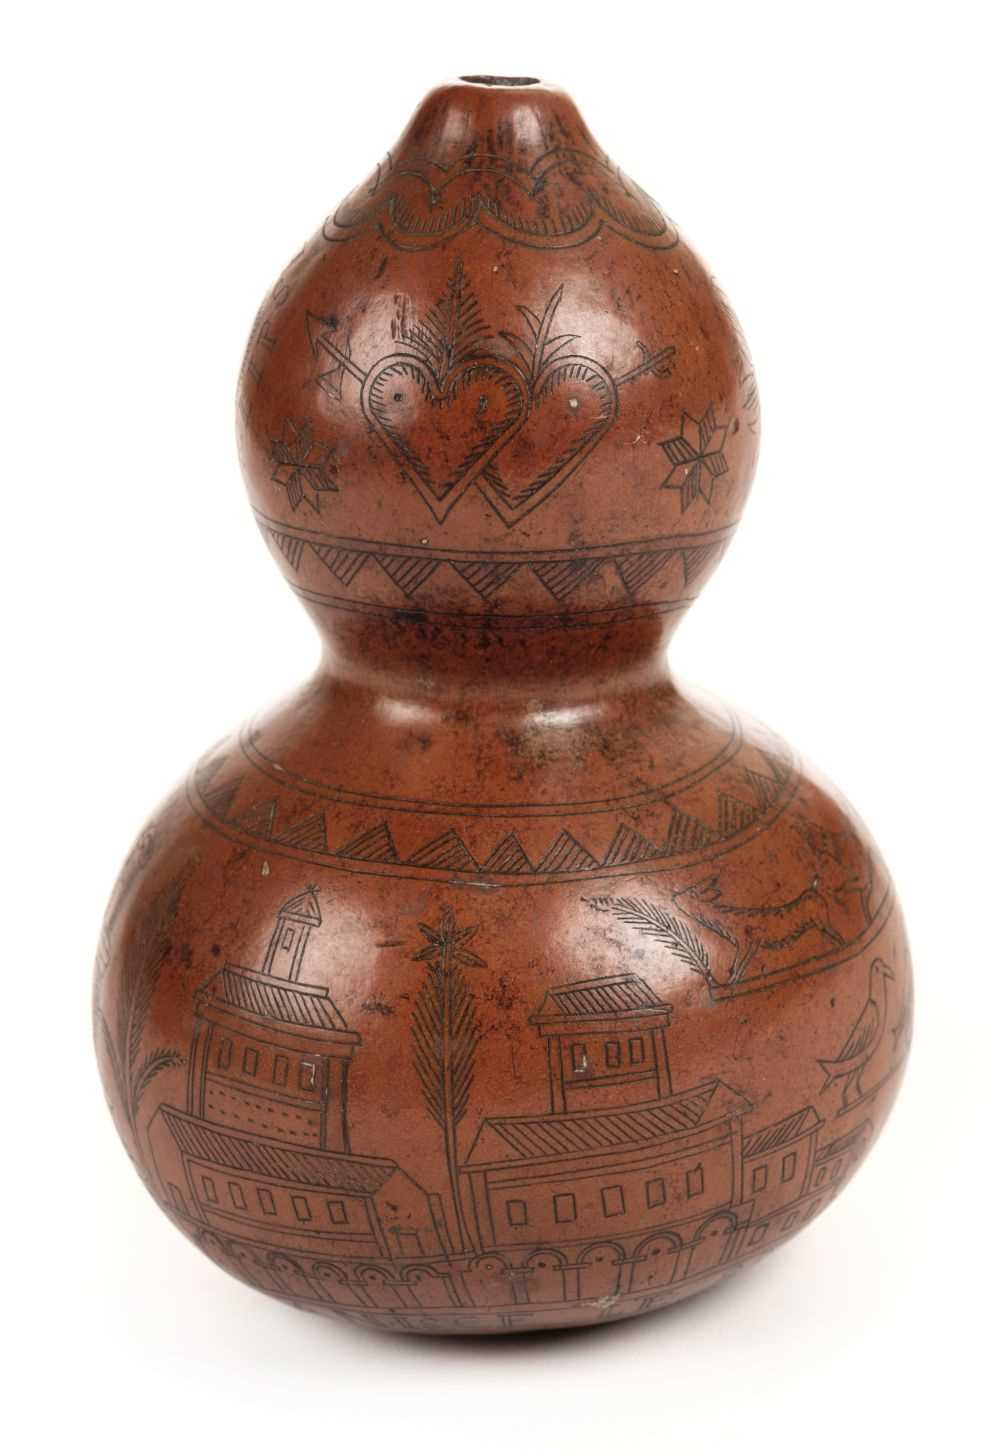 Lot 117 - Gourd. An early 19th century French double gourd with scrimshaw work